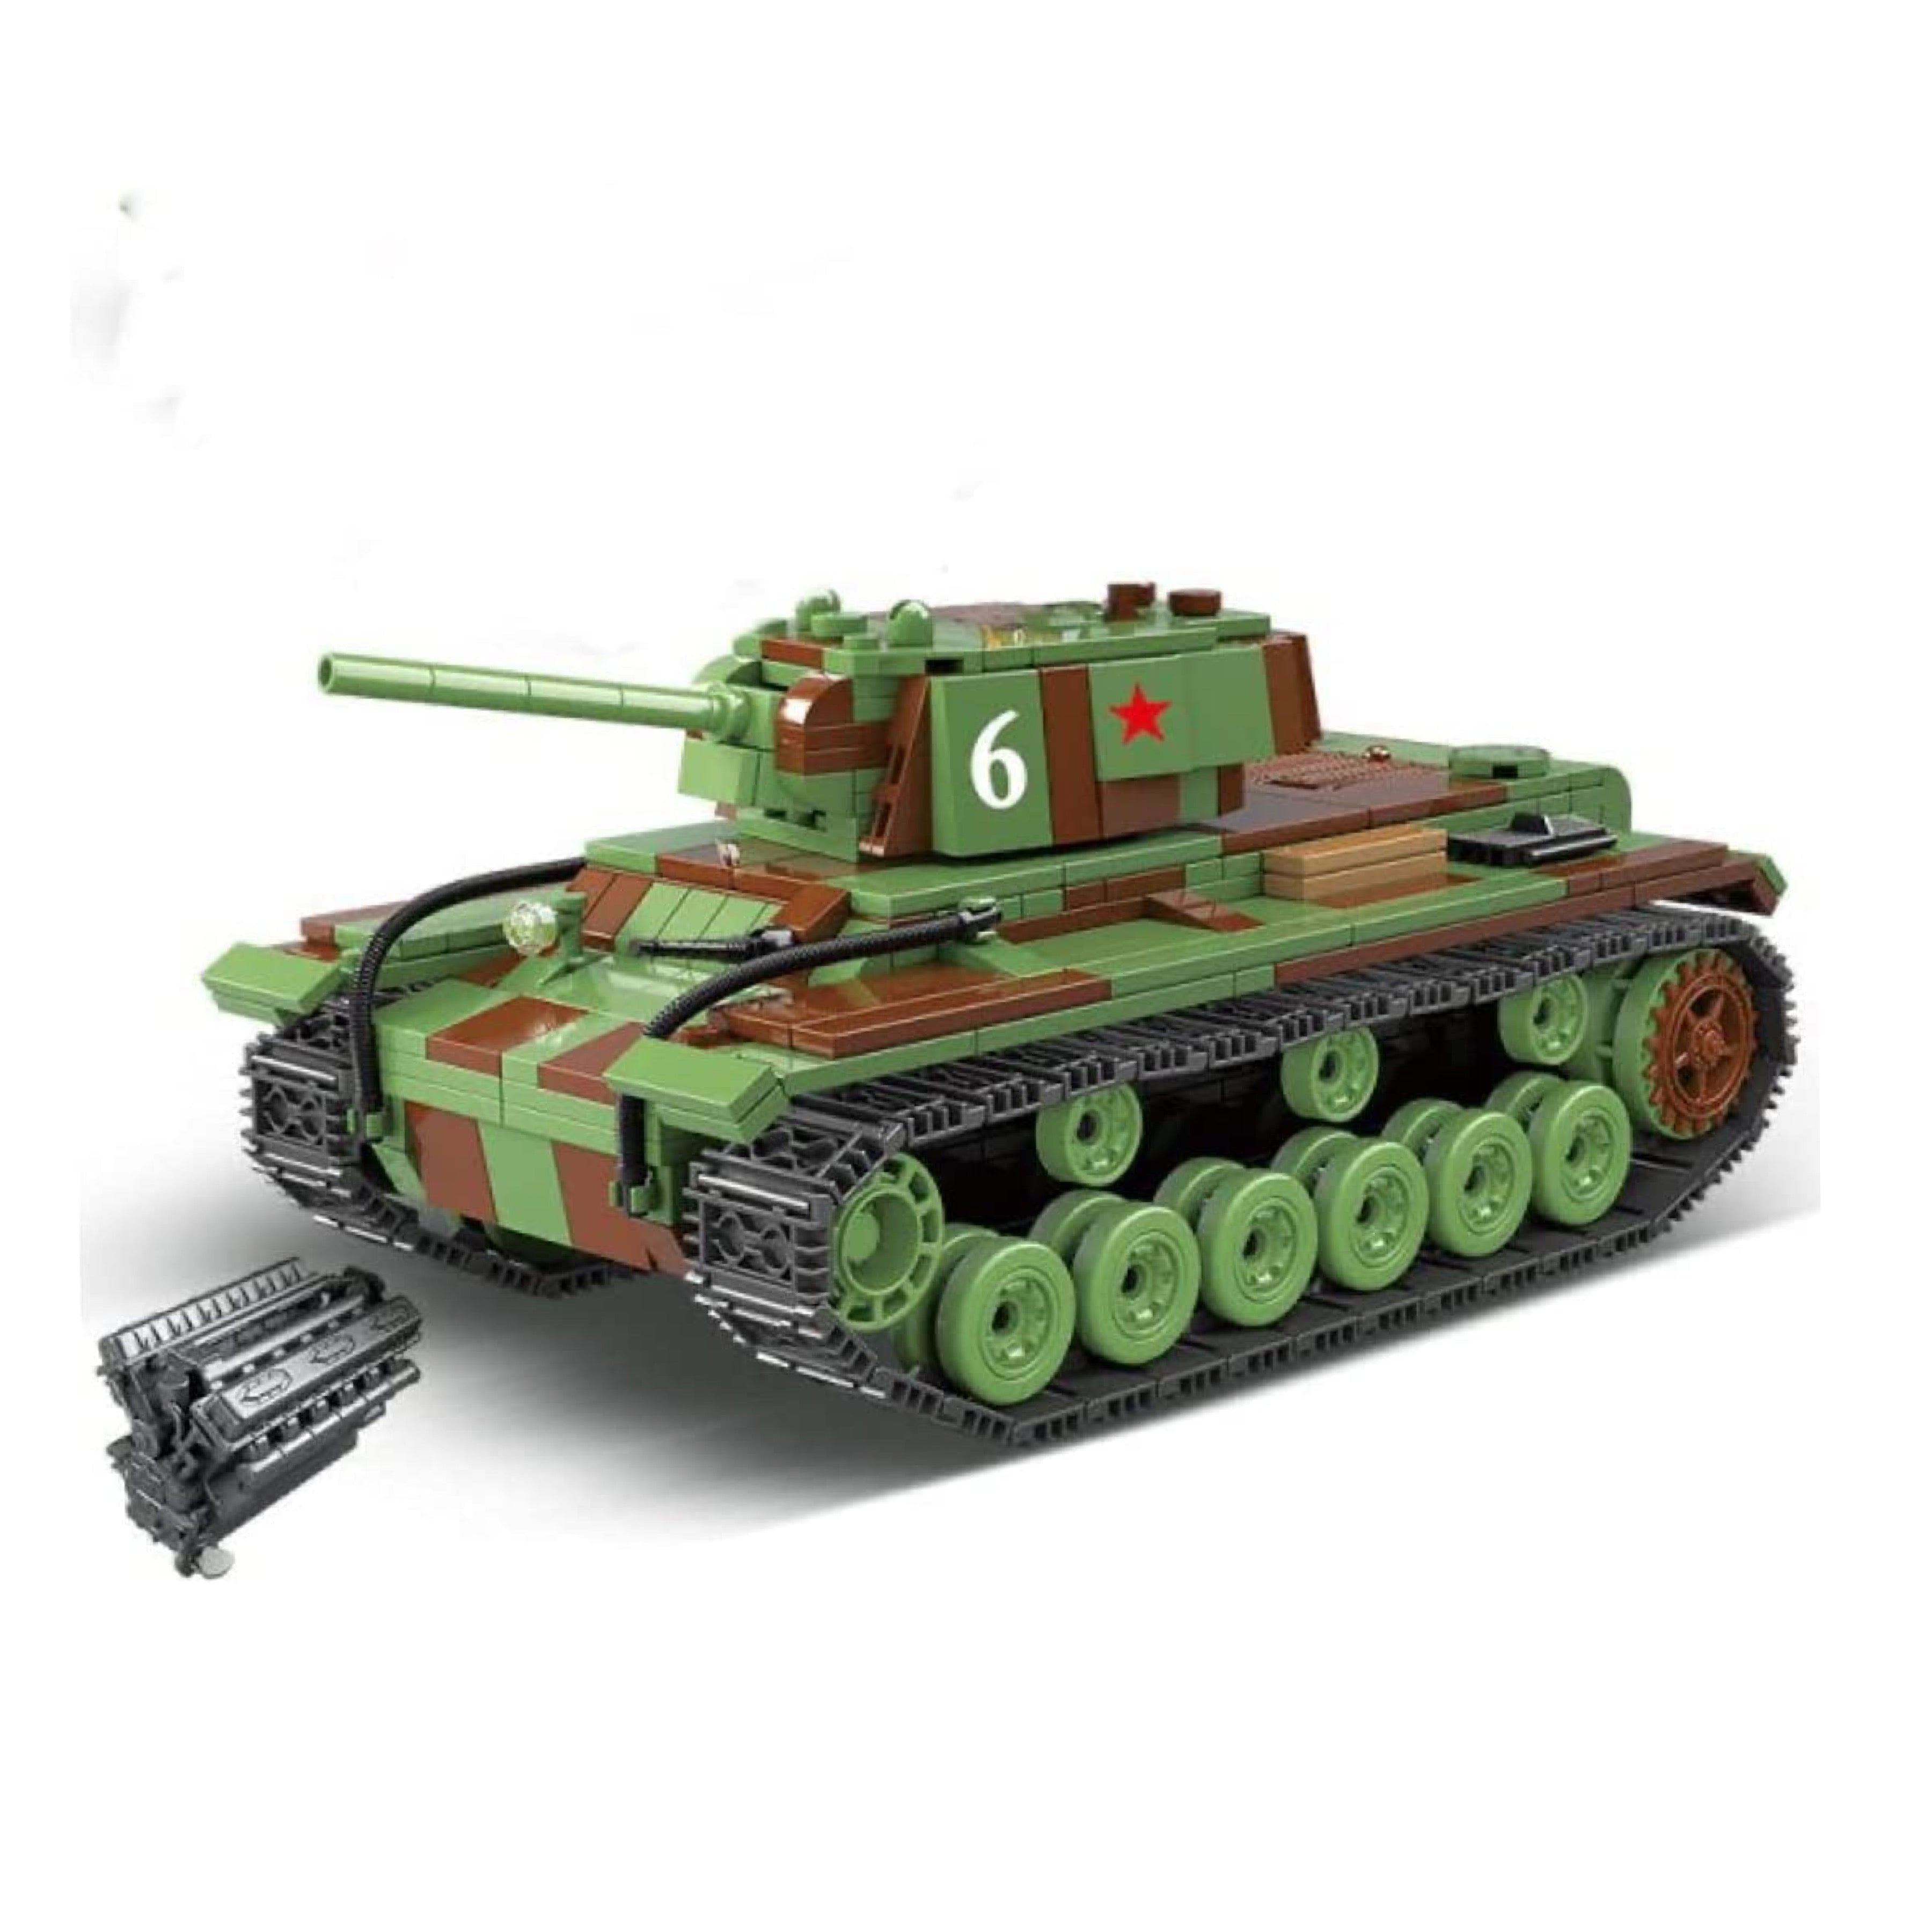 WVINVW Military Tank Building Set, Compatible with Lego Tank Military  Challenger Main Battle WW2 Army Model Building Block, Toy Gifts for Boys  6-10